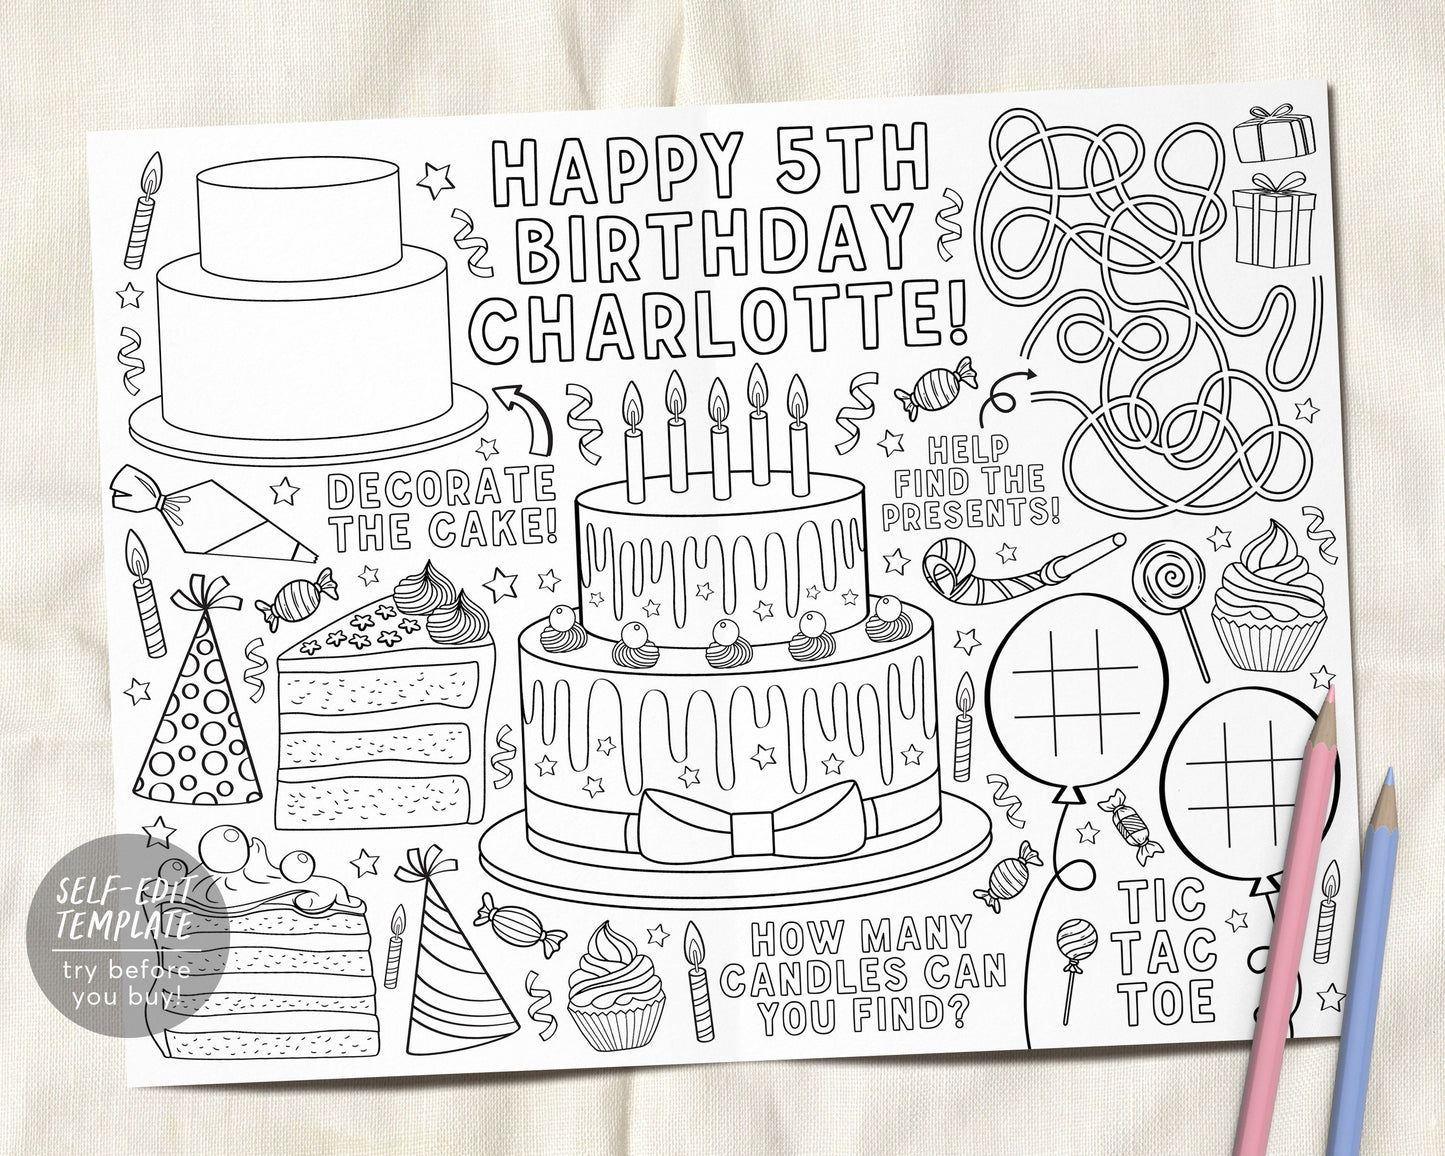 Birthday Party Coloring Placemat For Kids Editable Template, Birthday Cake Coloring Page Craft Activity Sheet Table Mat Printable Games